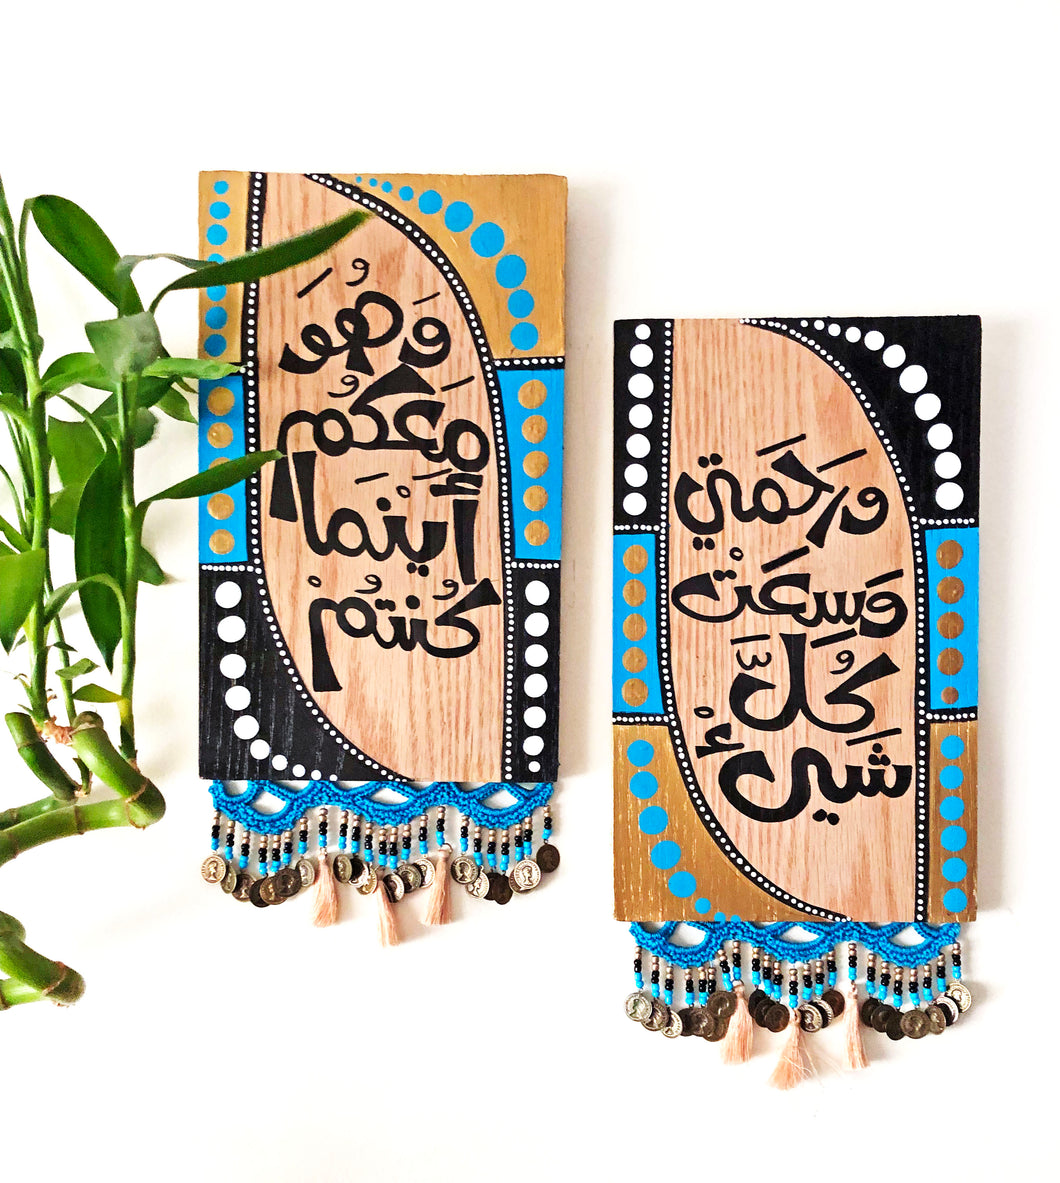 Set of 2 Handmade Wooden Wall Decorations